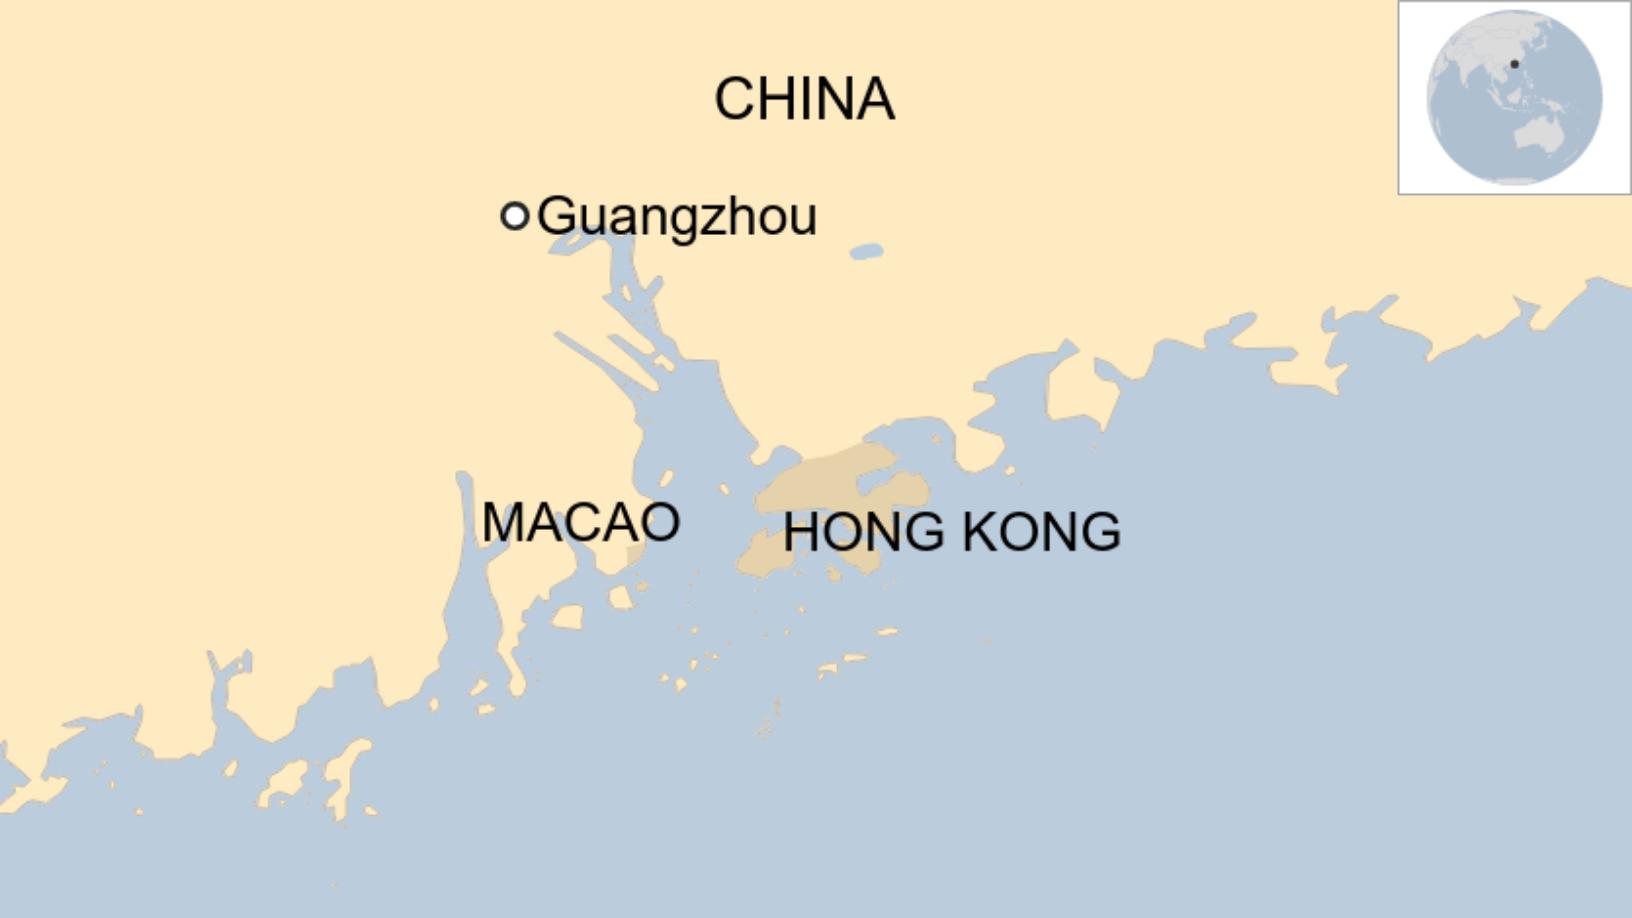 Macau: China's other 'one country, two systems' region